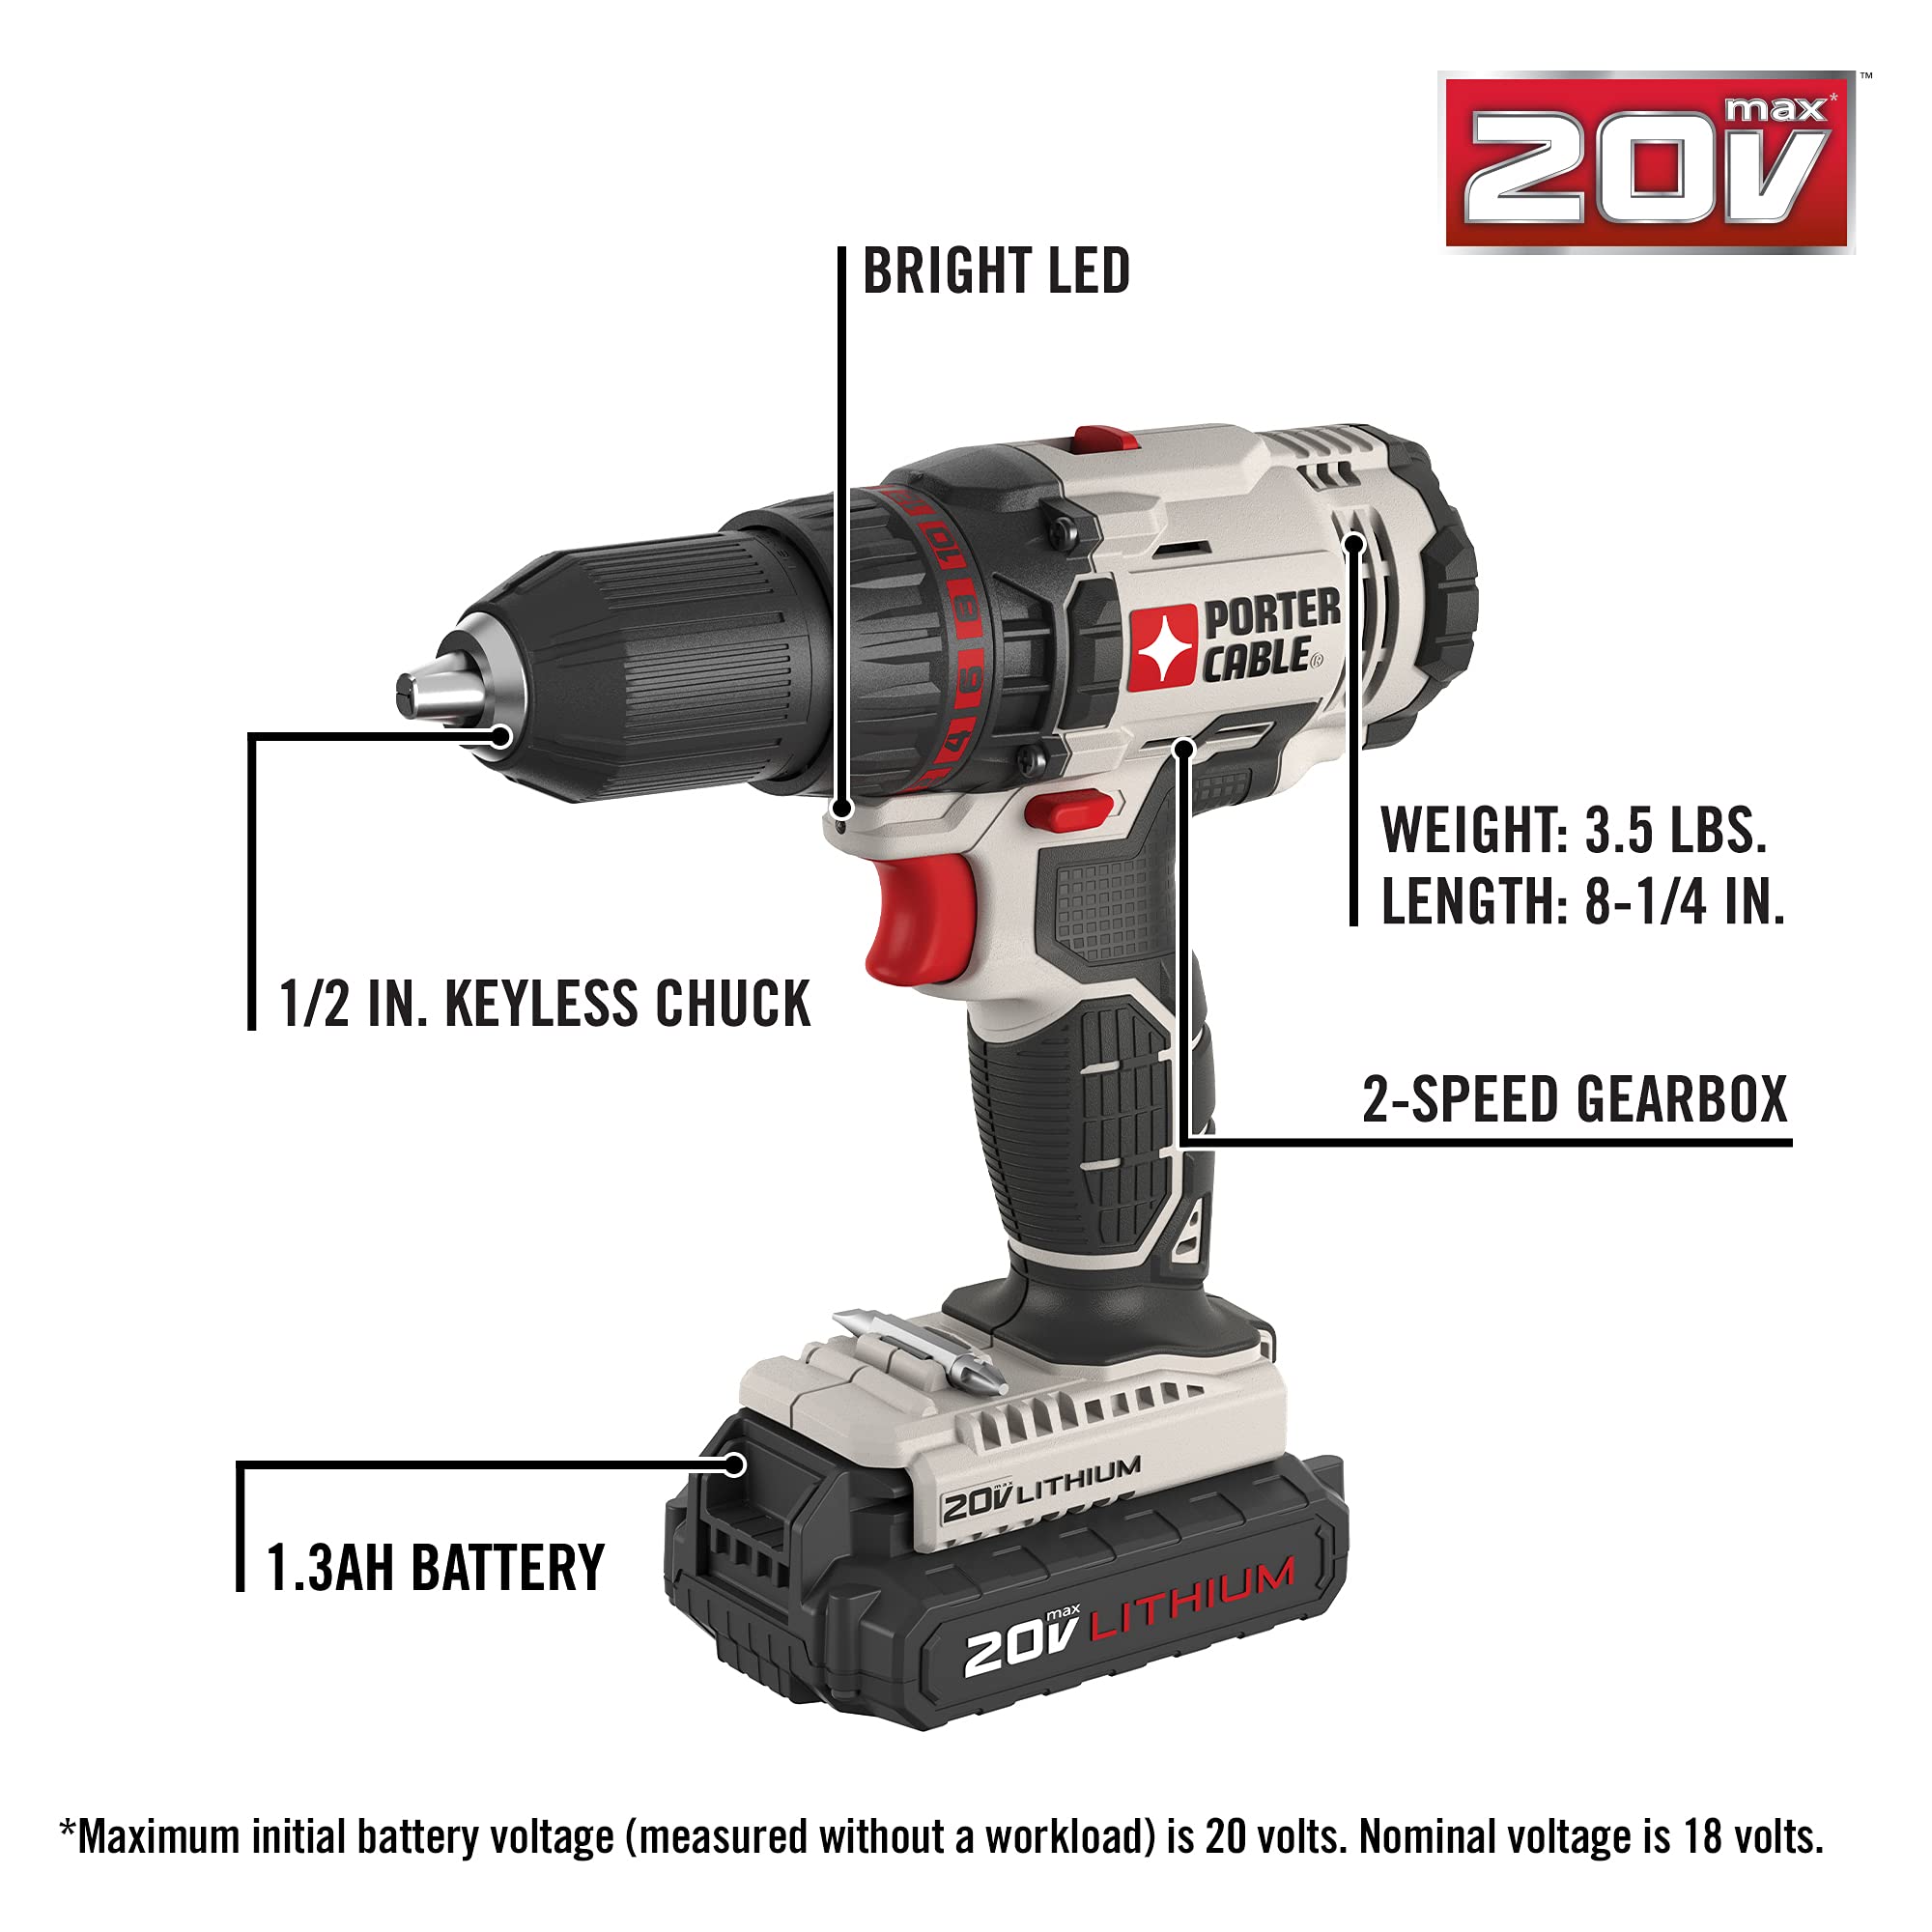 PORTER-CABLE 20V MAX* Cordless Drill/Driver, 1/2-Inch, Tool Only (PCC601LB)